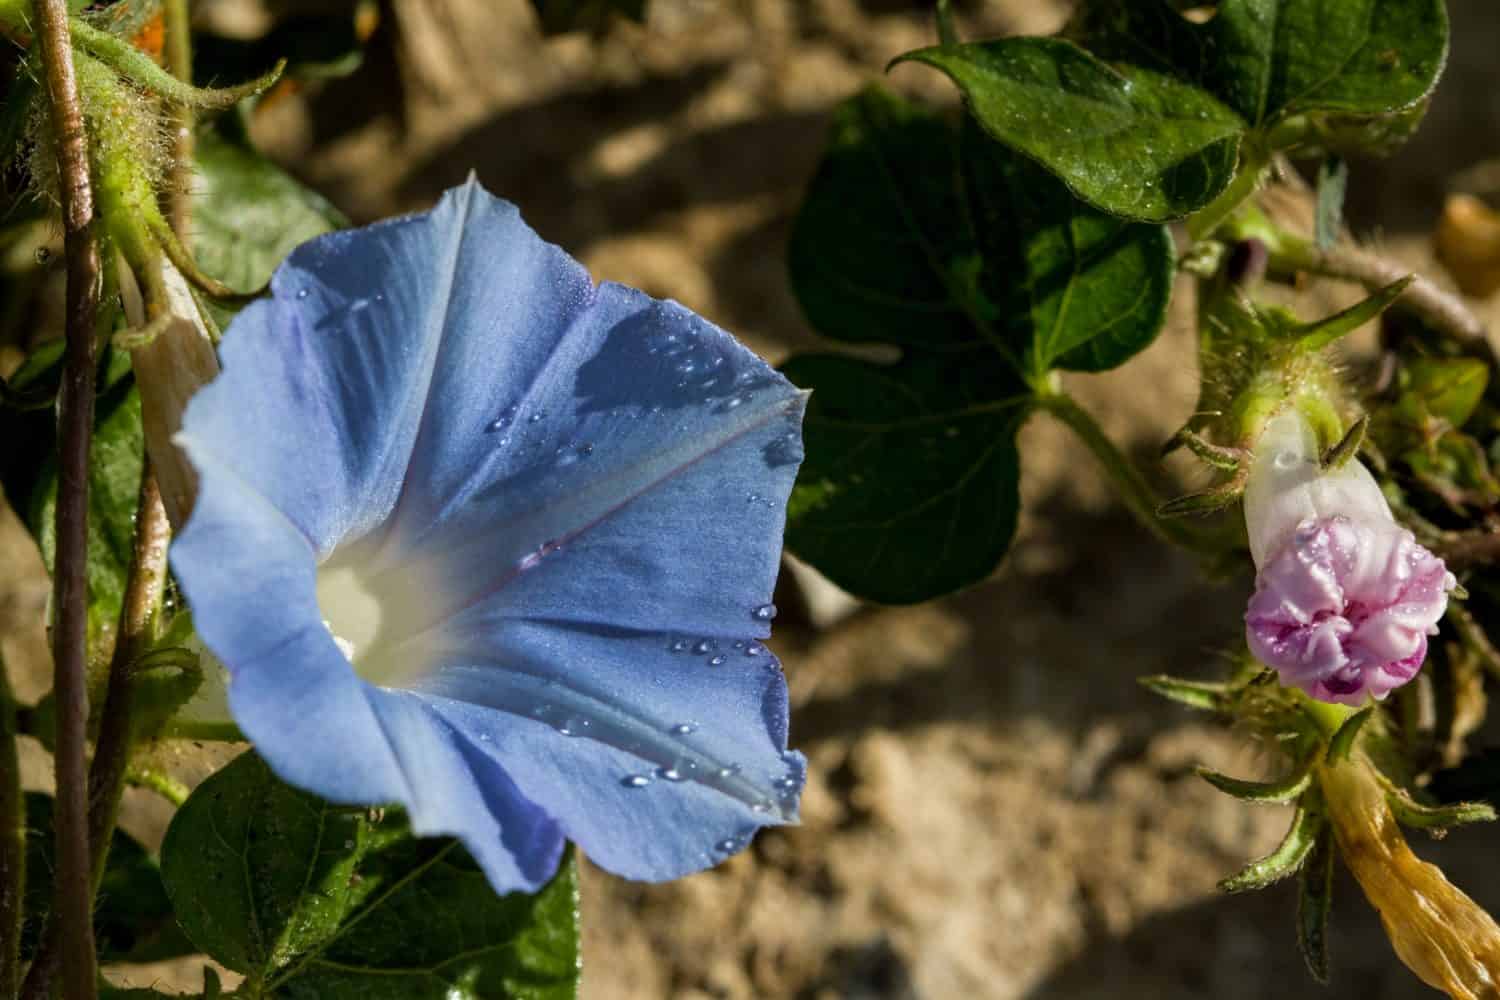 Bright Blue Morning Glory Wildflowers - Ipomoea hederacea